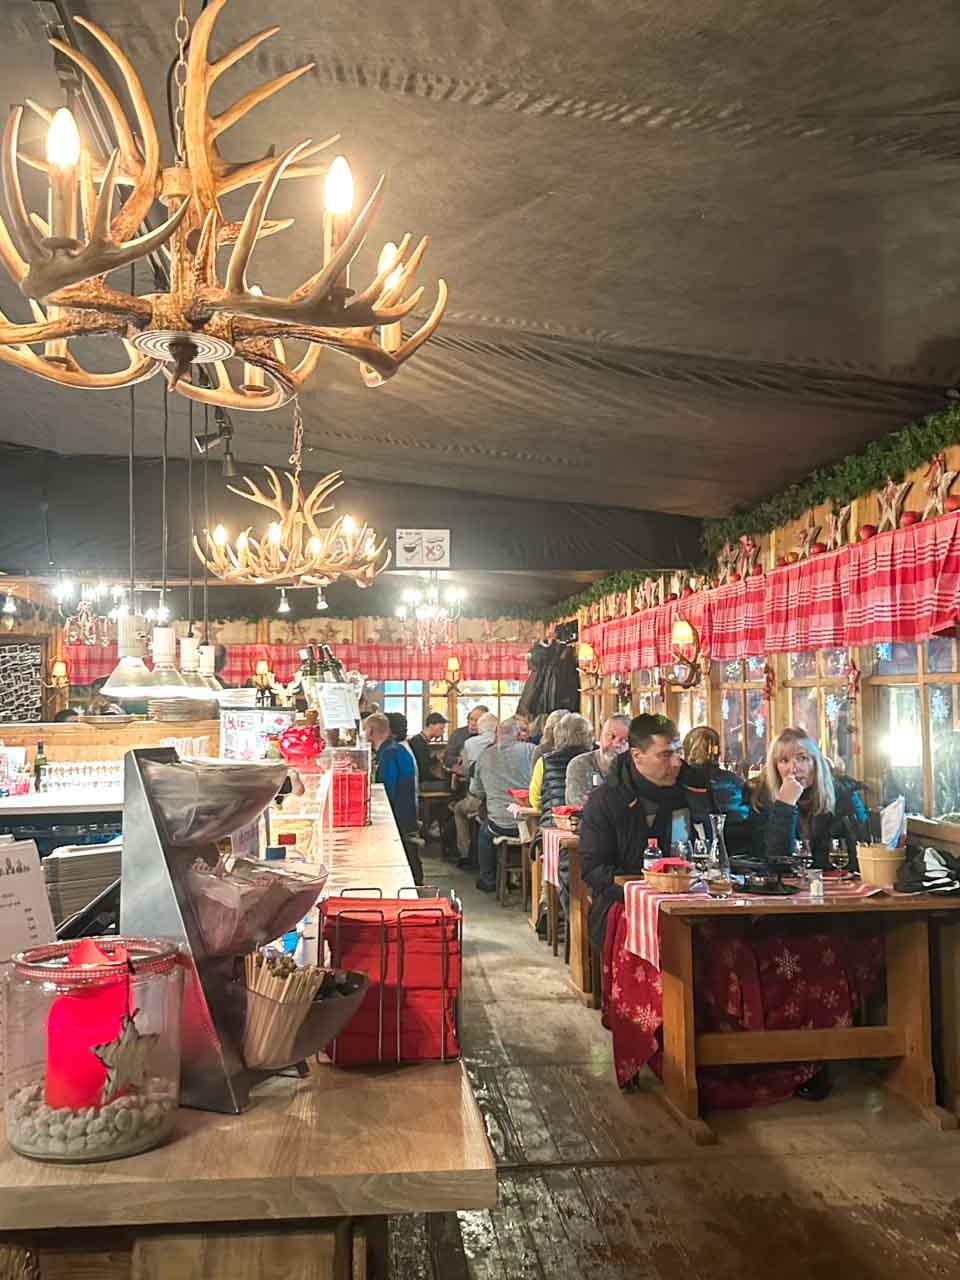 A cosy indoor seating area at the Wacker Fonduestübli restaurant in Basel with antler chandeliers and festive decorations